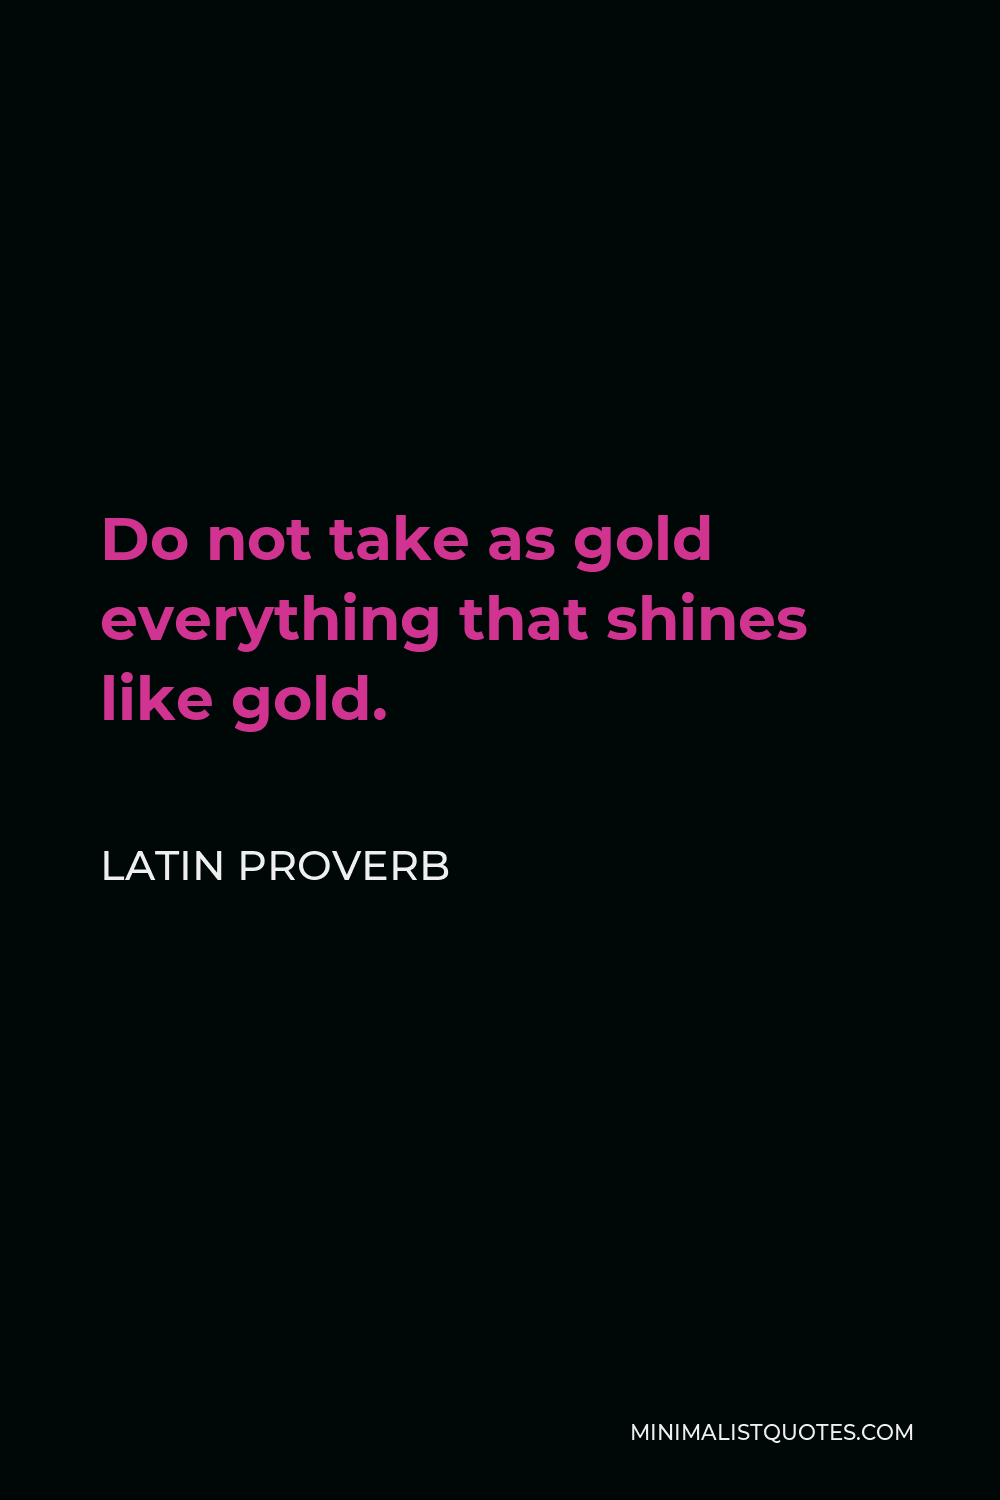 Latin Proverb Quote - Do not take as gold everything that shines like gold.